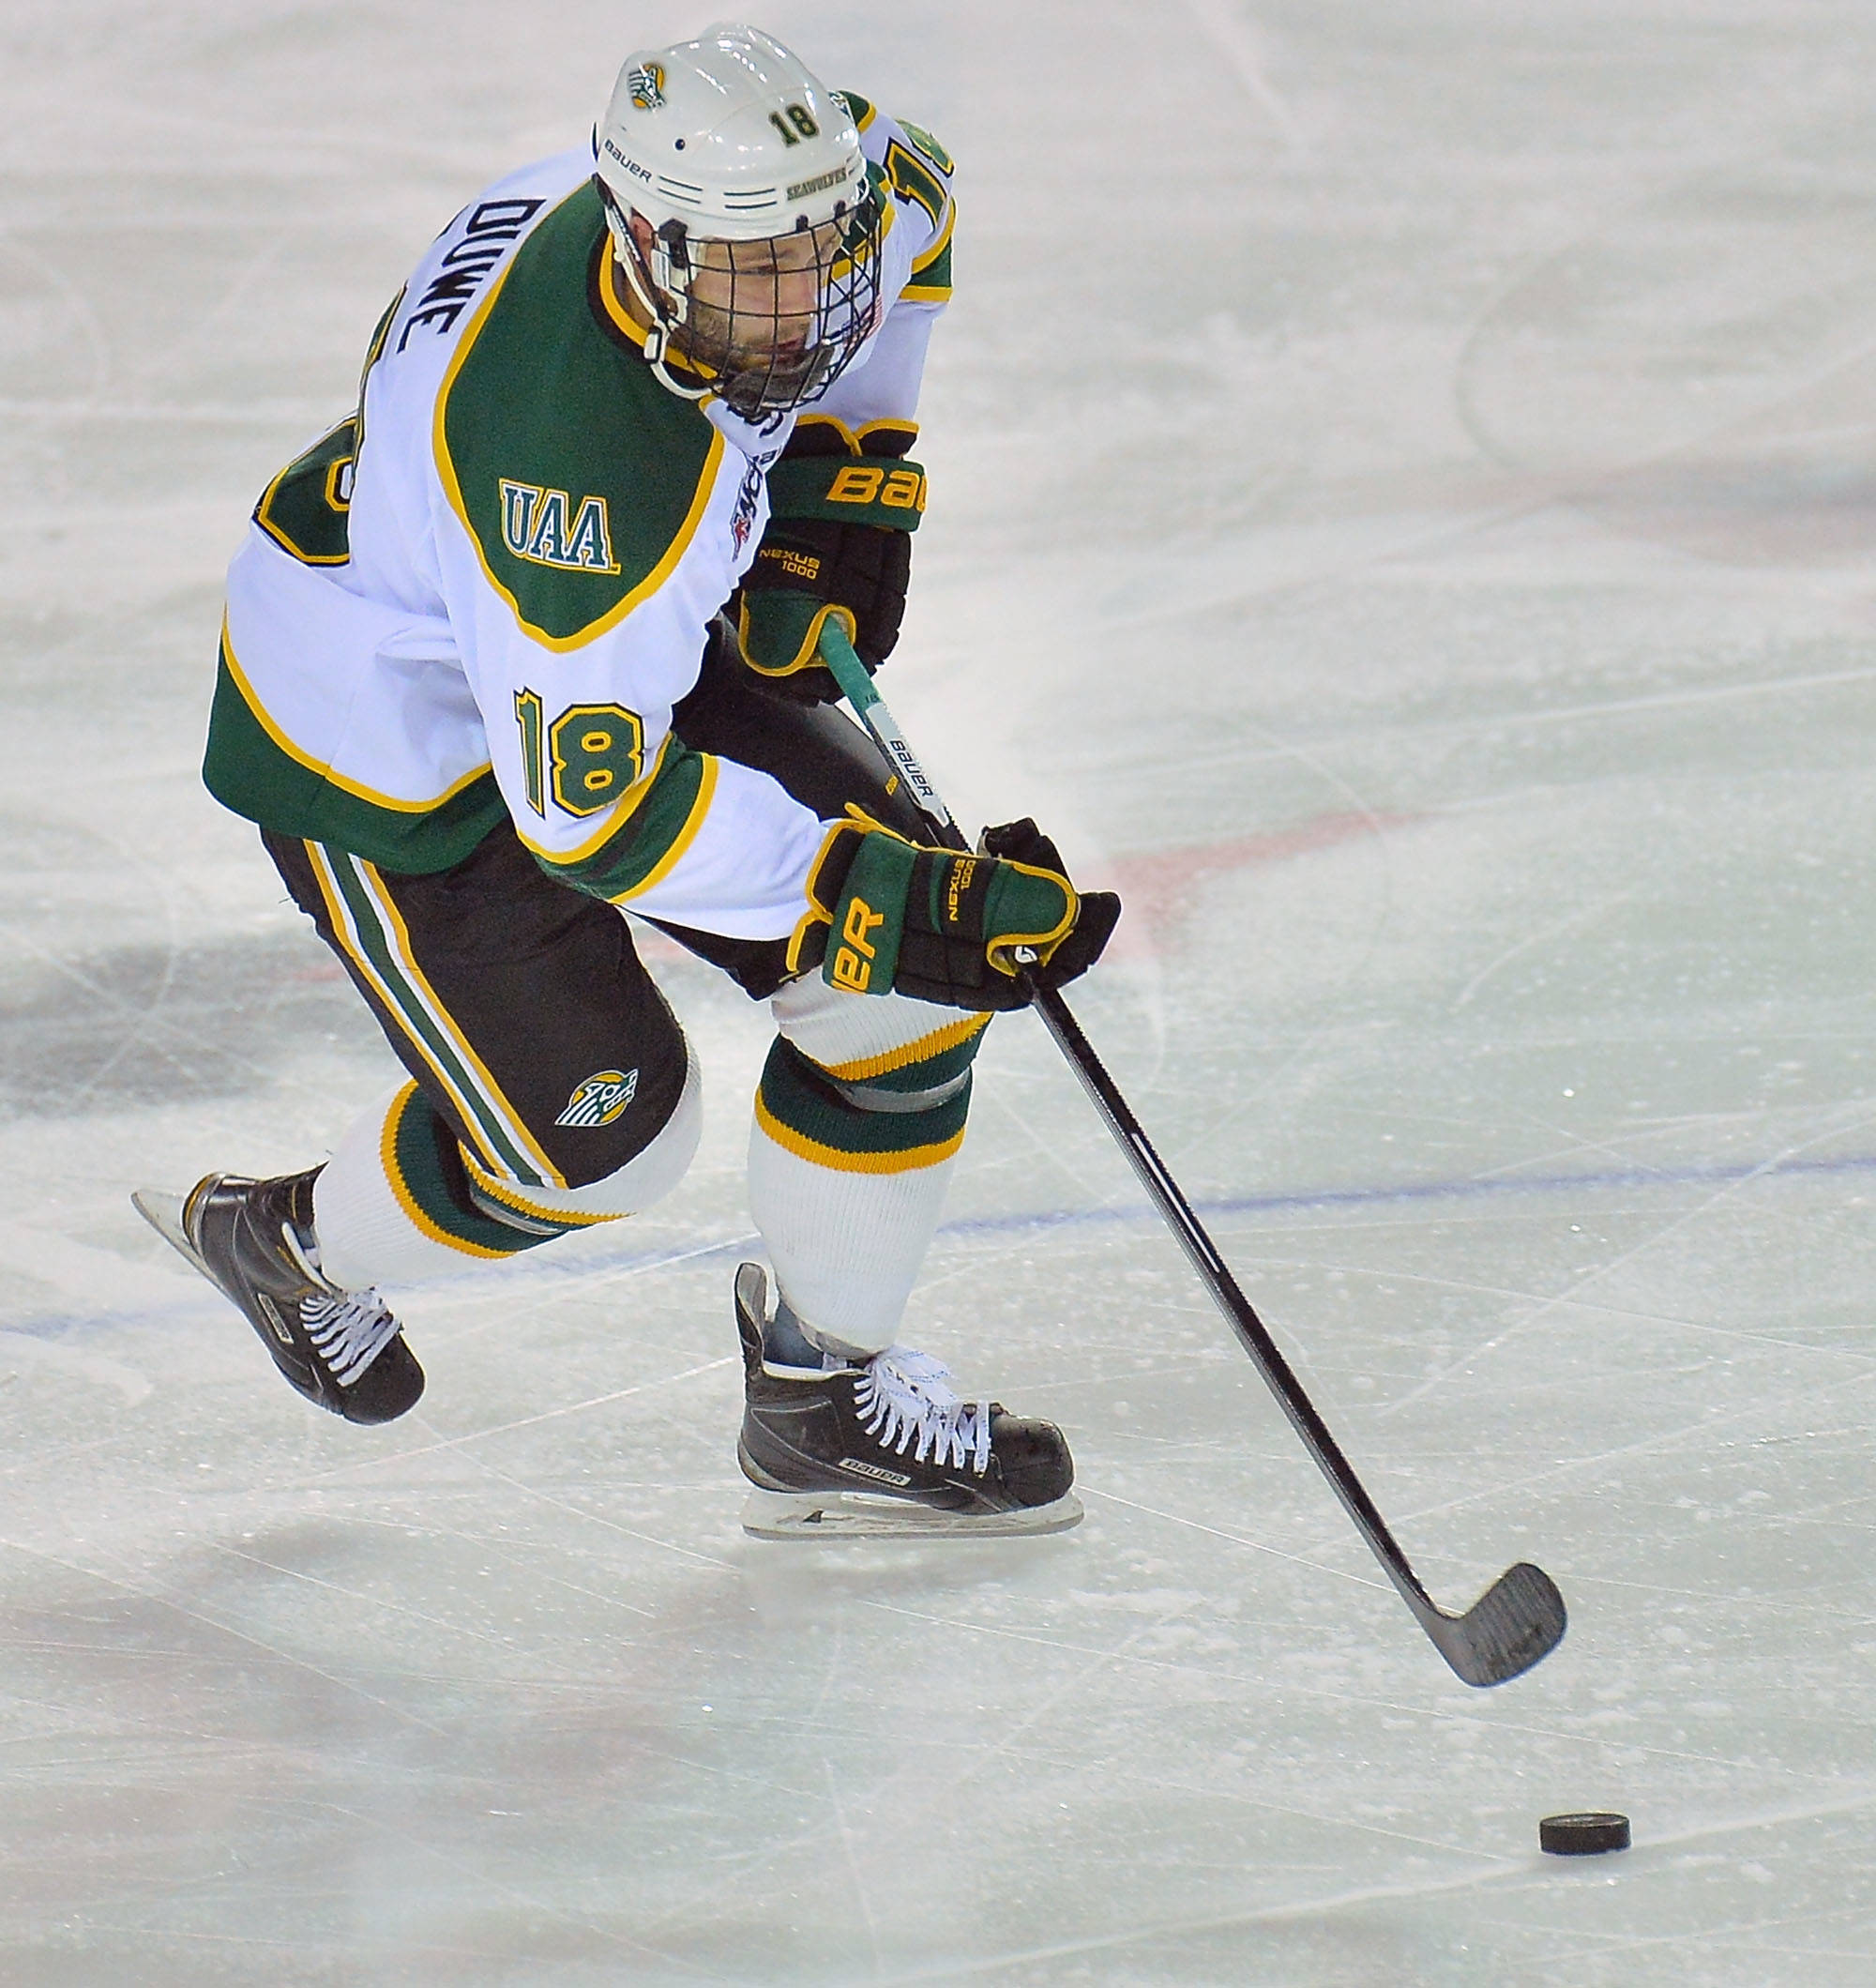 Forward Brad Duwe controls the puck in a game against Bowling Green on Oct. 31, 2015. (Photo provided by UAA Athletics)